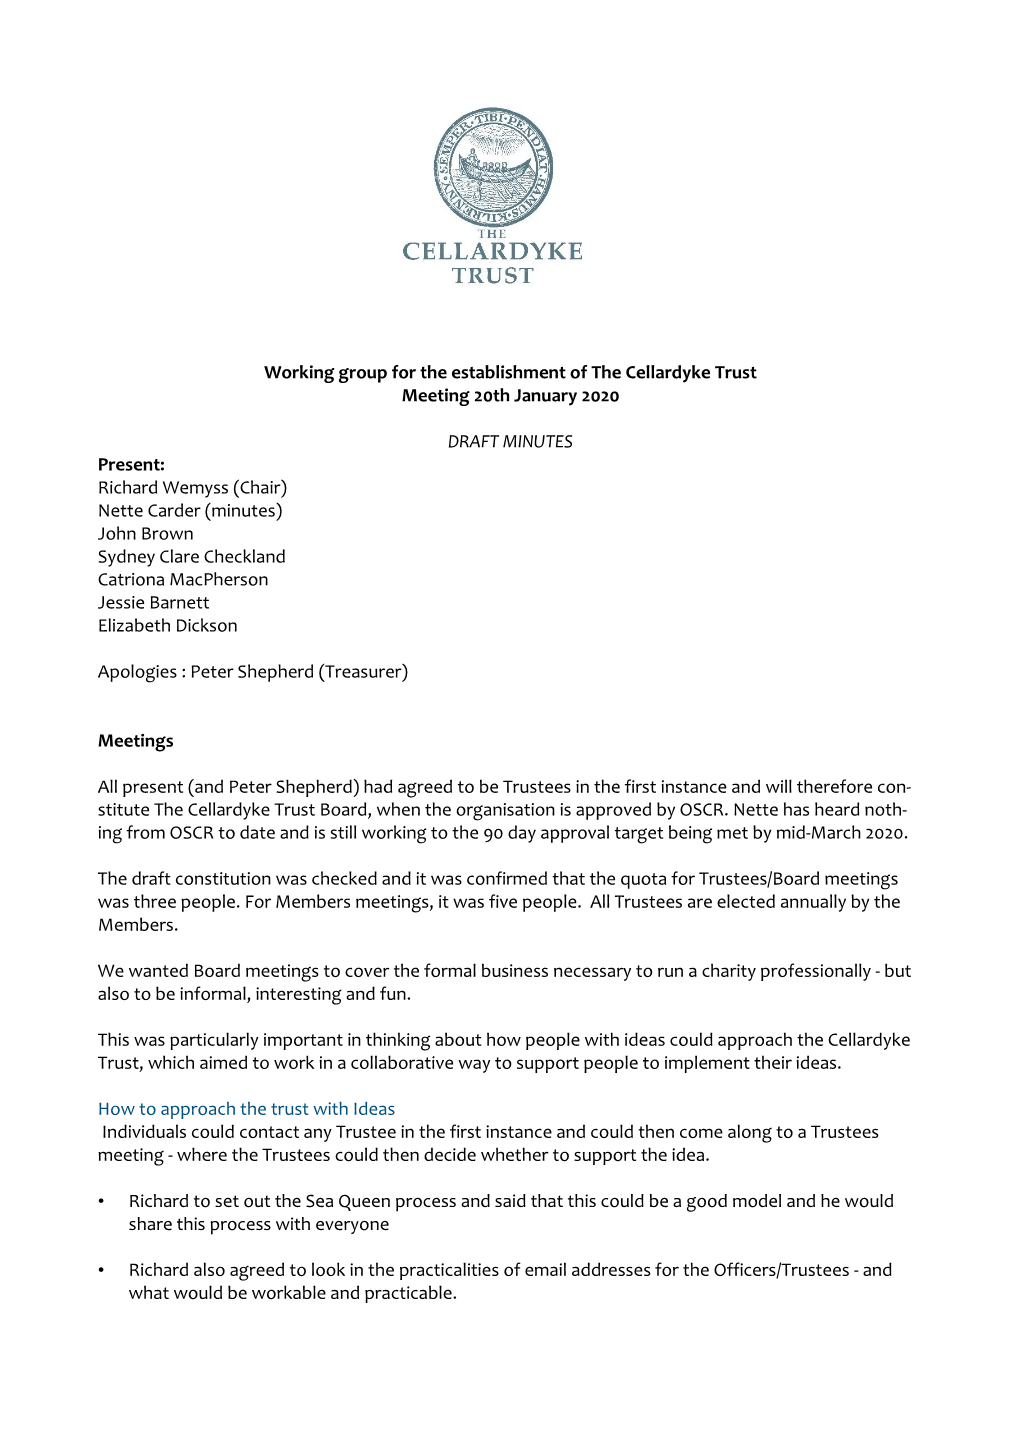 Working Group for the Establishment of the Cellardyke Trust Meeting 20Th January 2020